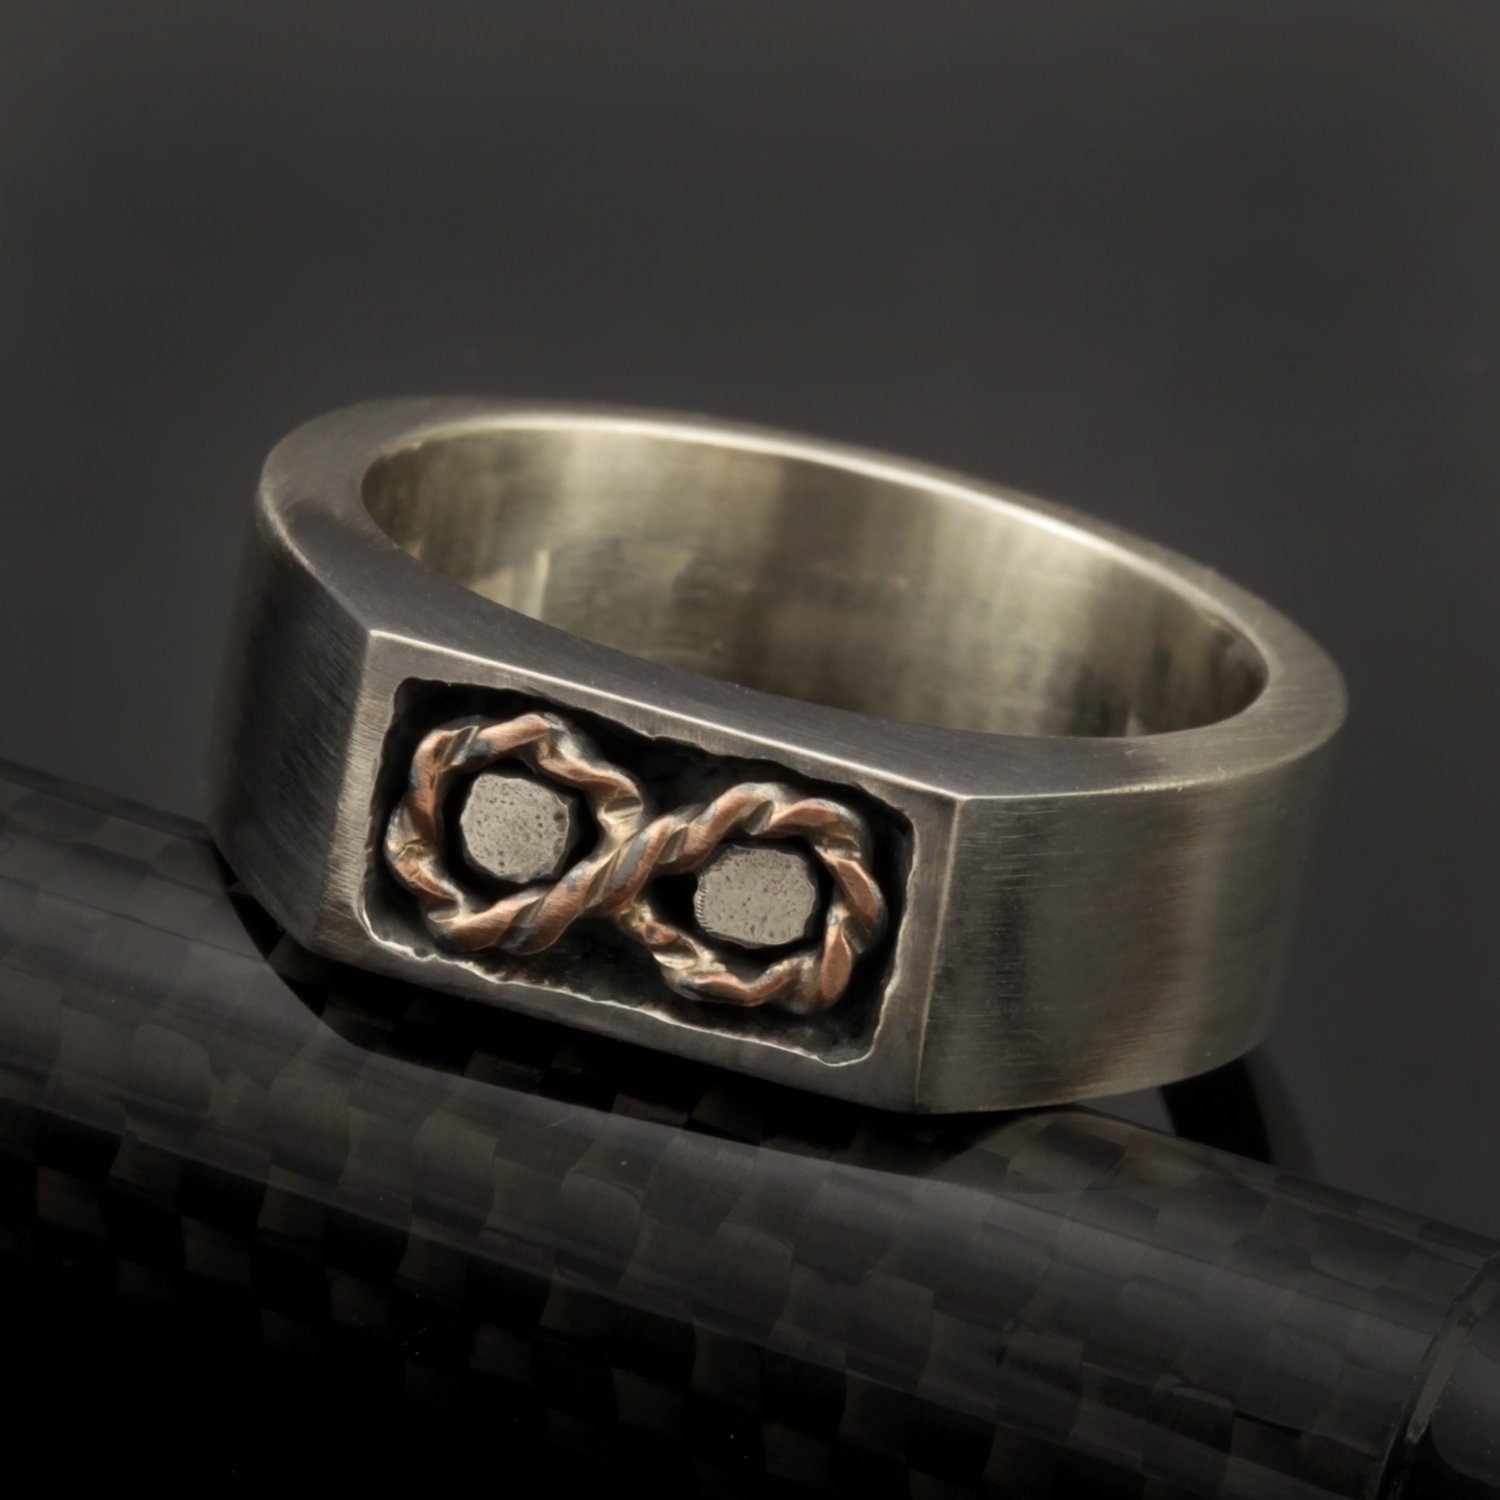 Men's Viking Wedding Bands | Norse Wedding Rings & Much More | Shop